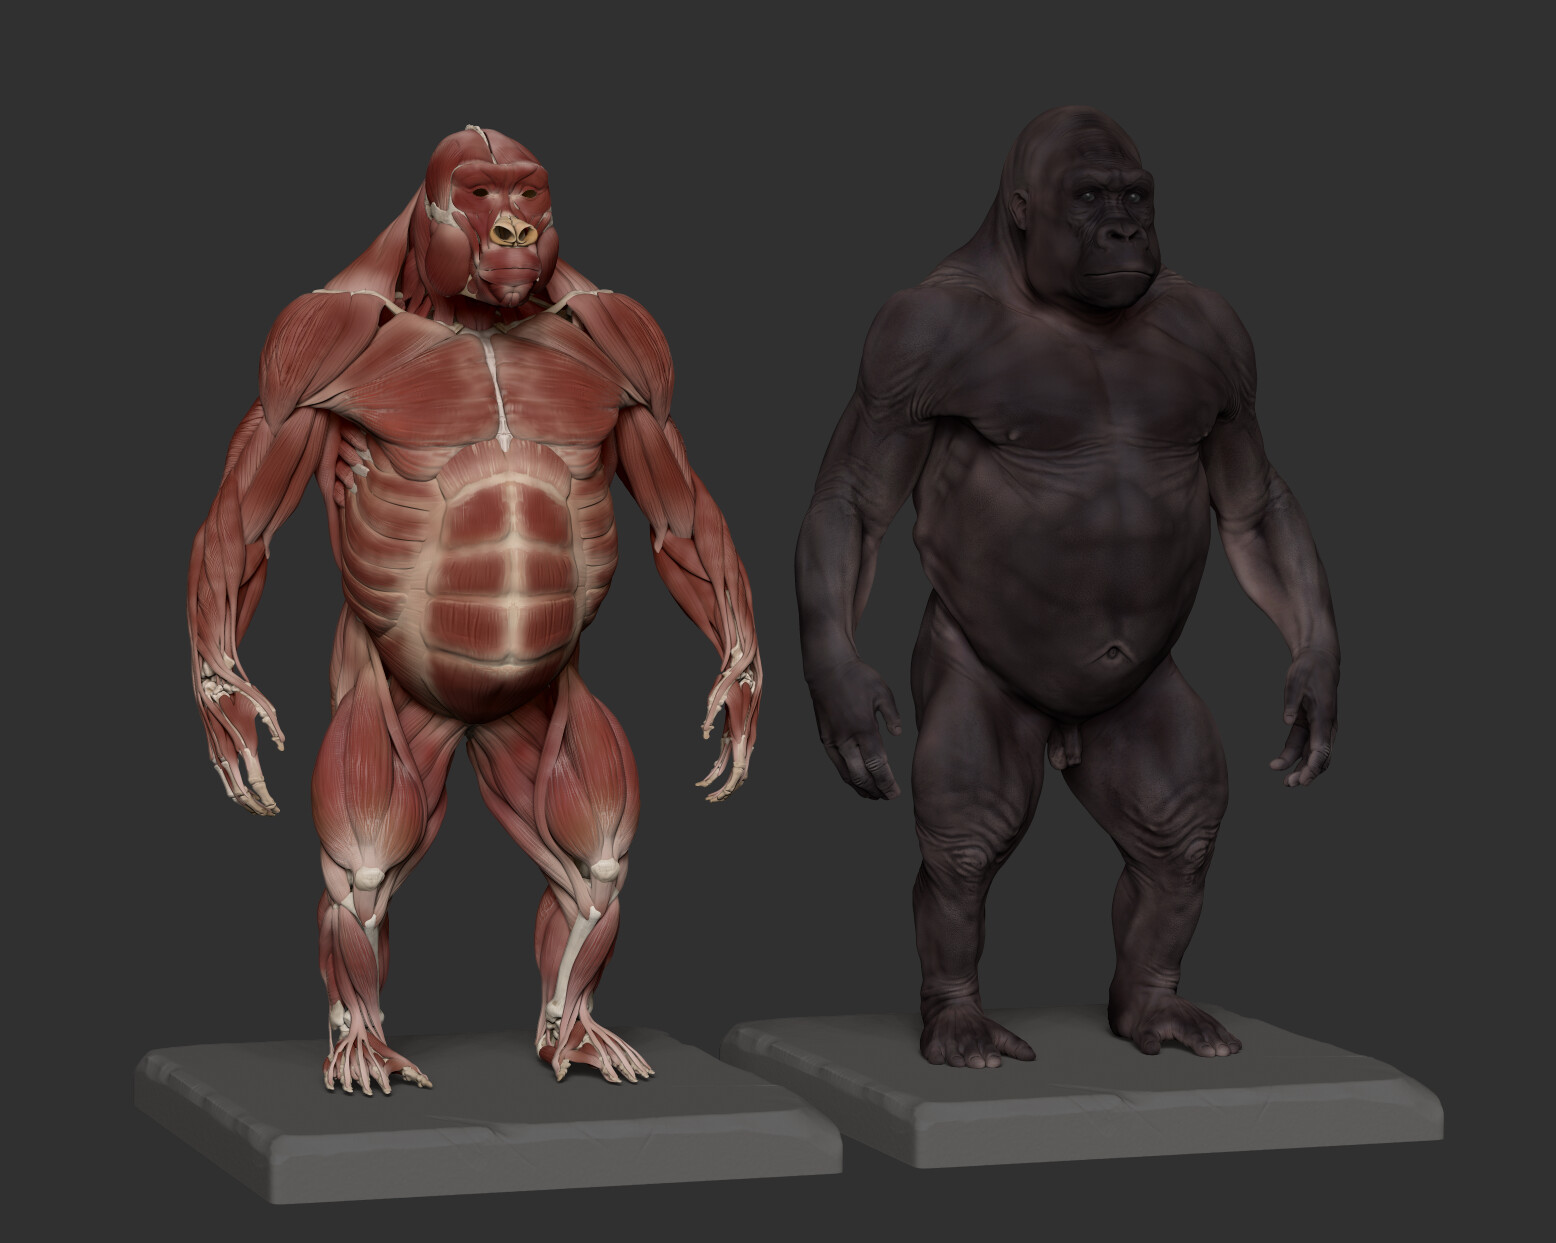 I did a quick pass of polypaint to highlight muscles' body vs tendons and aponeurosis. 